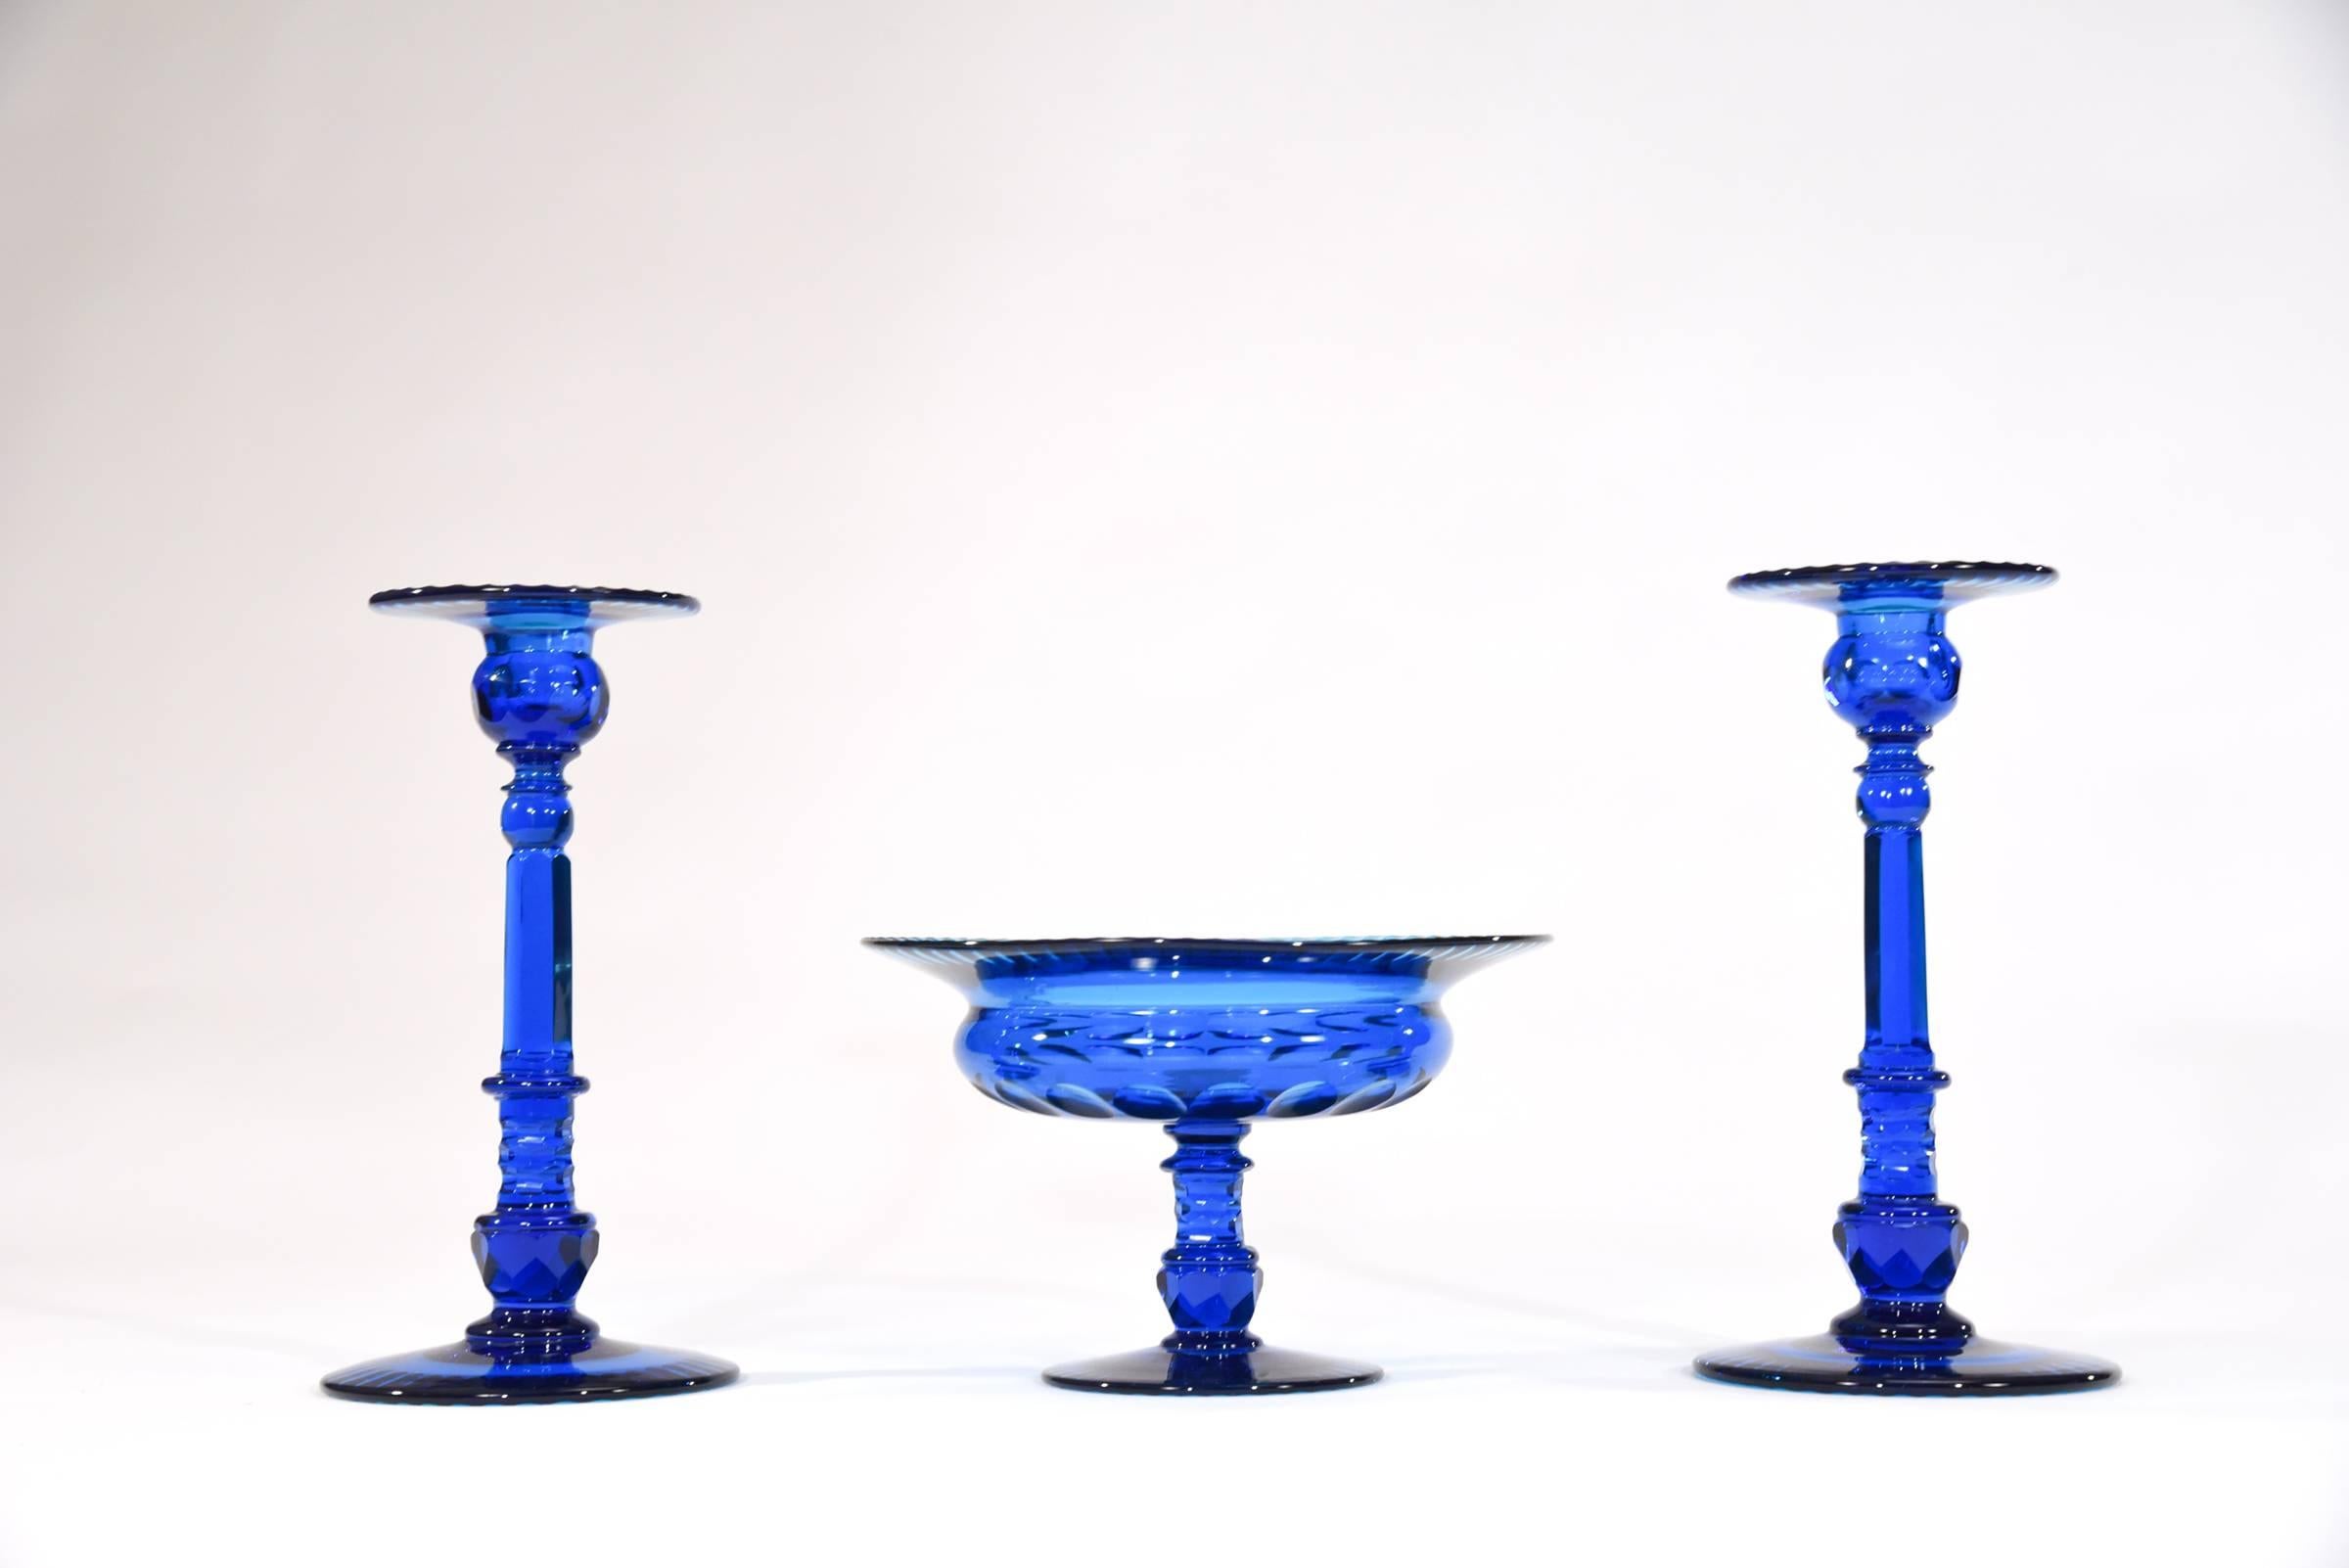 This is a dramatic and large centerpiece set made by Steuben in their heyday. The rich deep turquoise blue is the perfect focal point on a table, sideboard or in a treasured collection. Each piece is handblown crystal that is masterfully cut with